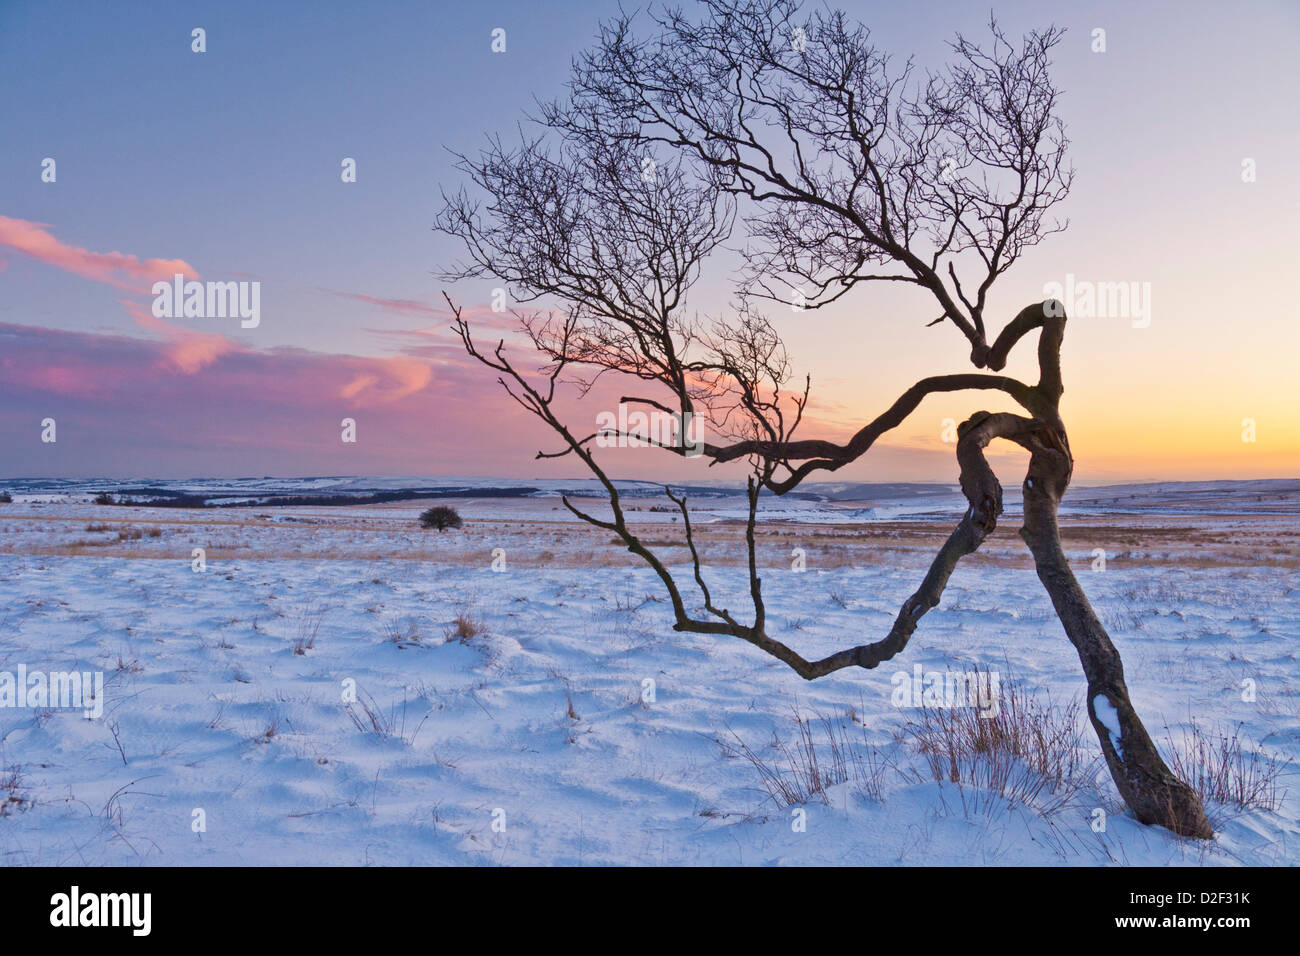 Twisted tree in the snow at sunset, Peak District National Park, Derbyshire, England, United Kingdom, GB EU Europe Stock Photo